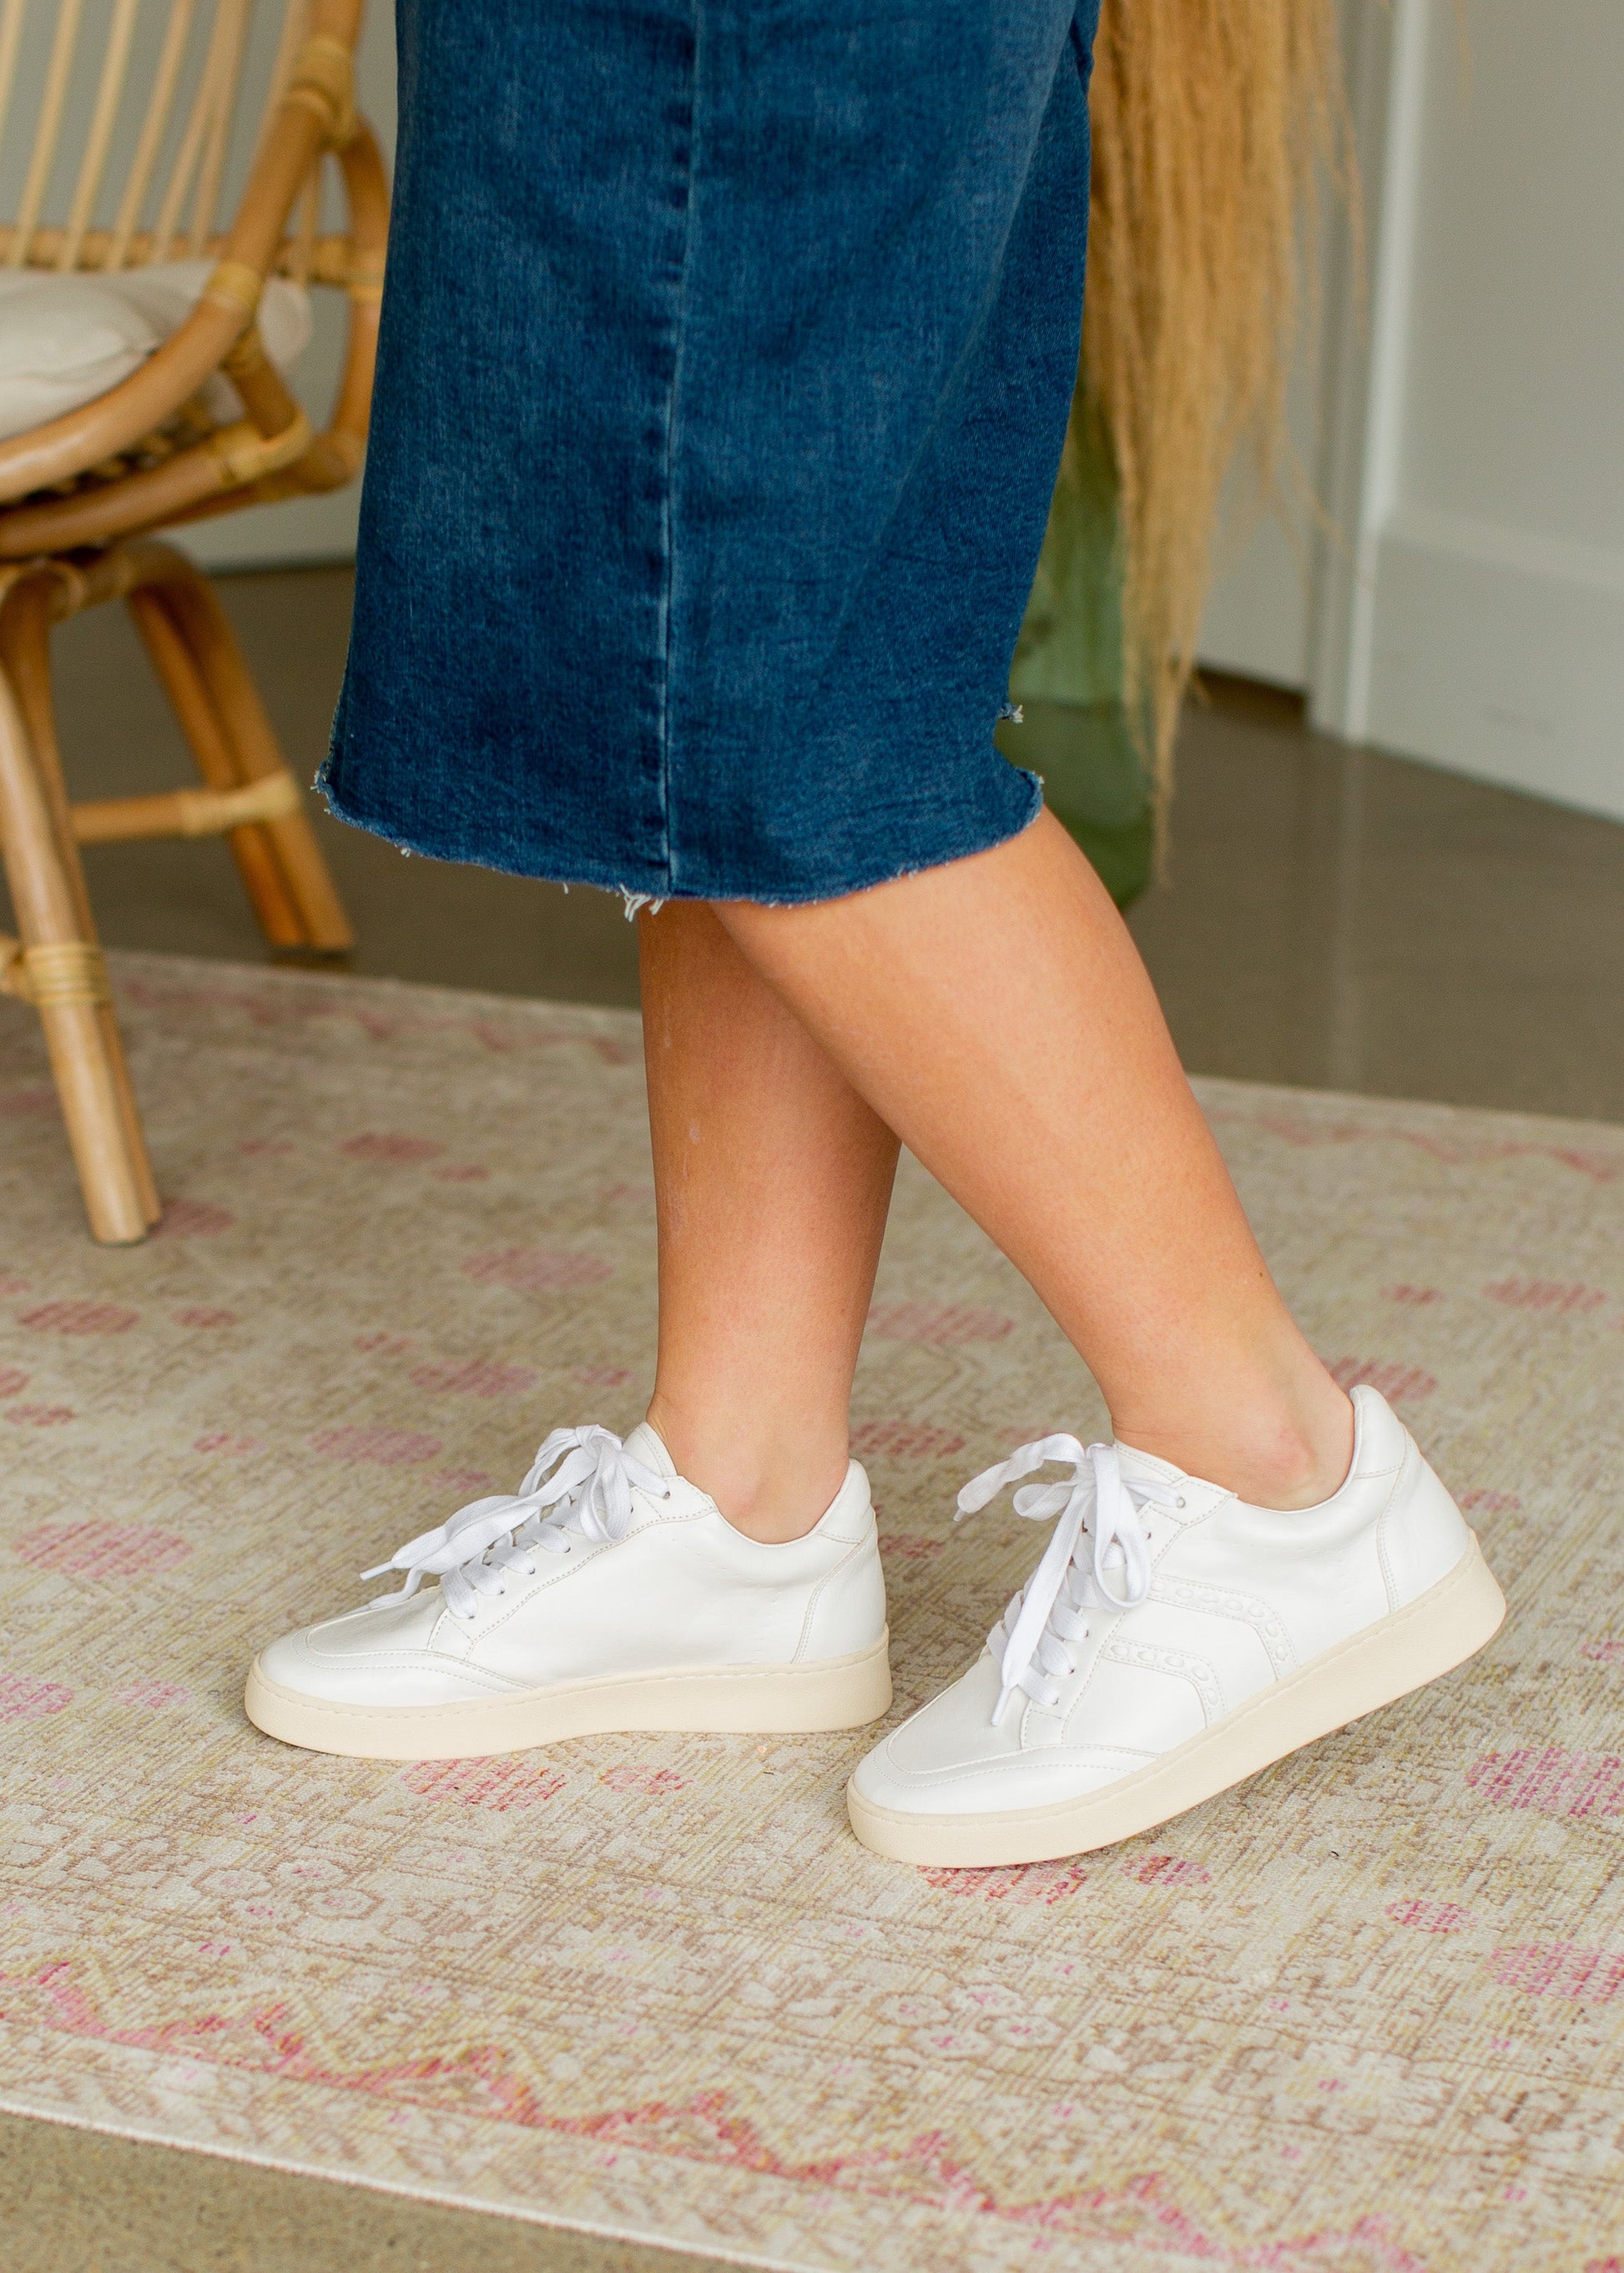 White Stitch Lace Up Sneaker - FINAL SALE Shoes